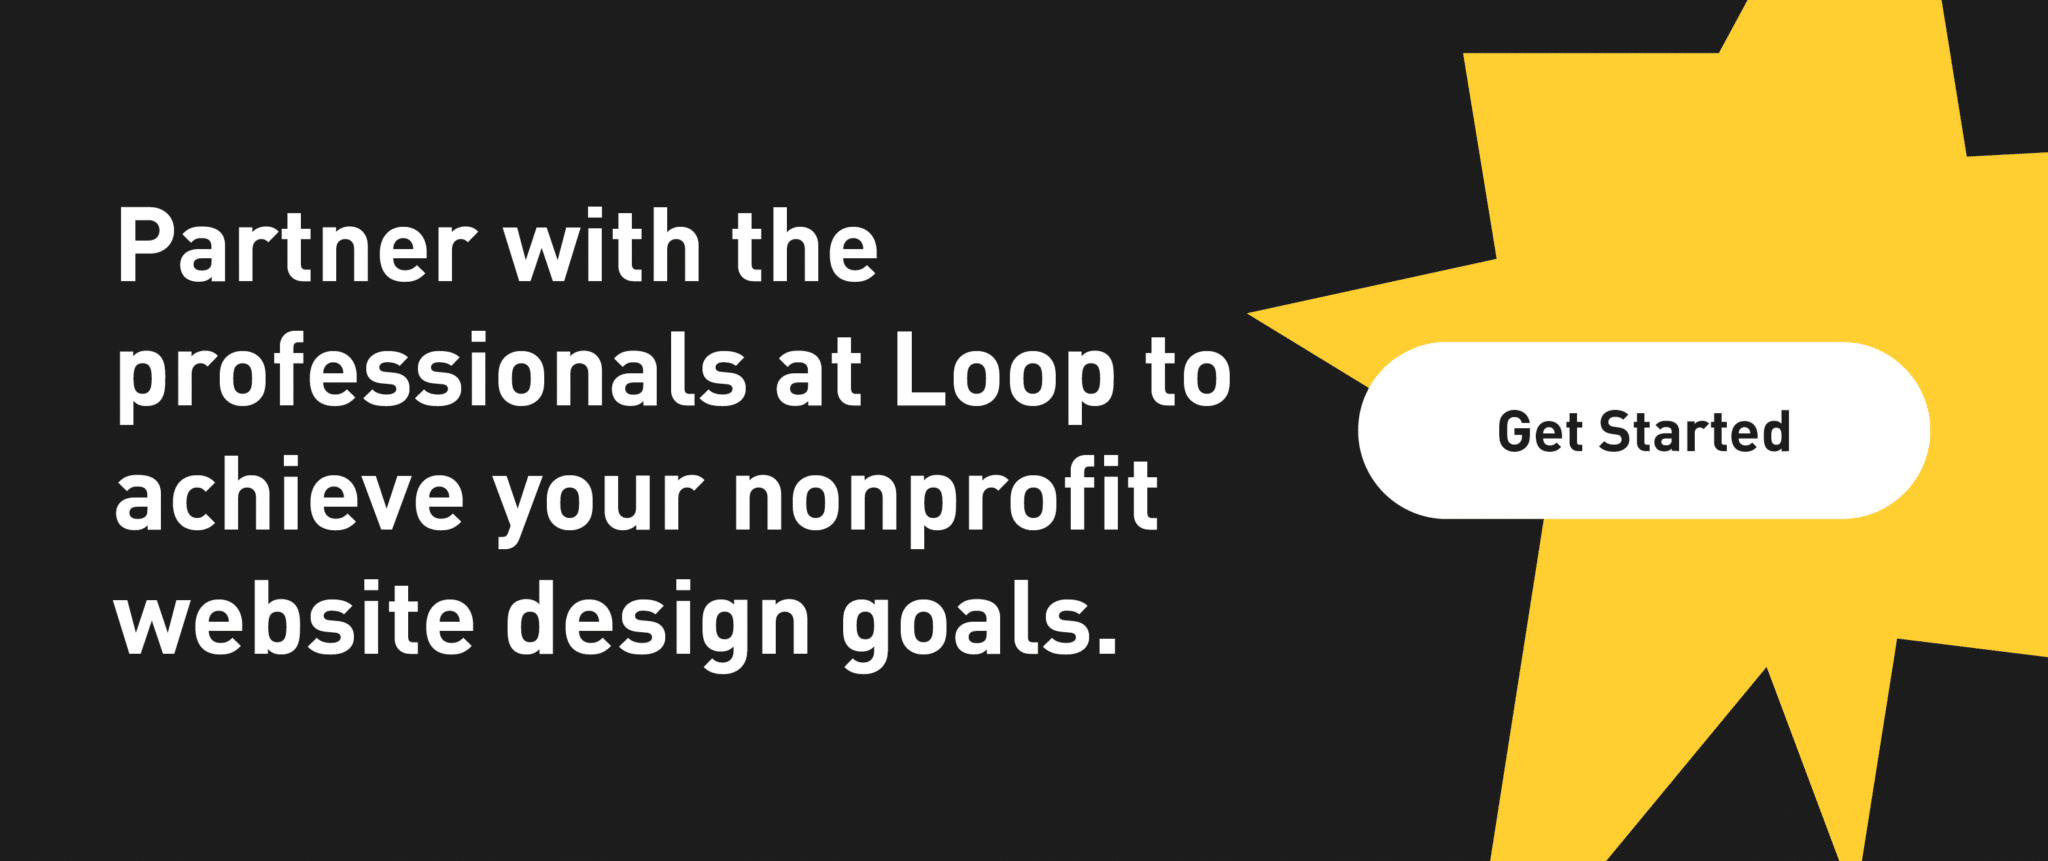 Partner with the professionals at Loop to achieve your nonprofit website design goals. Get Started.